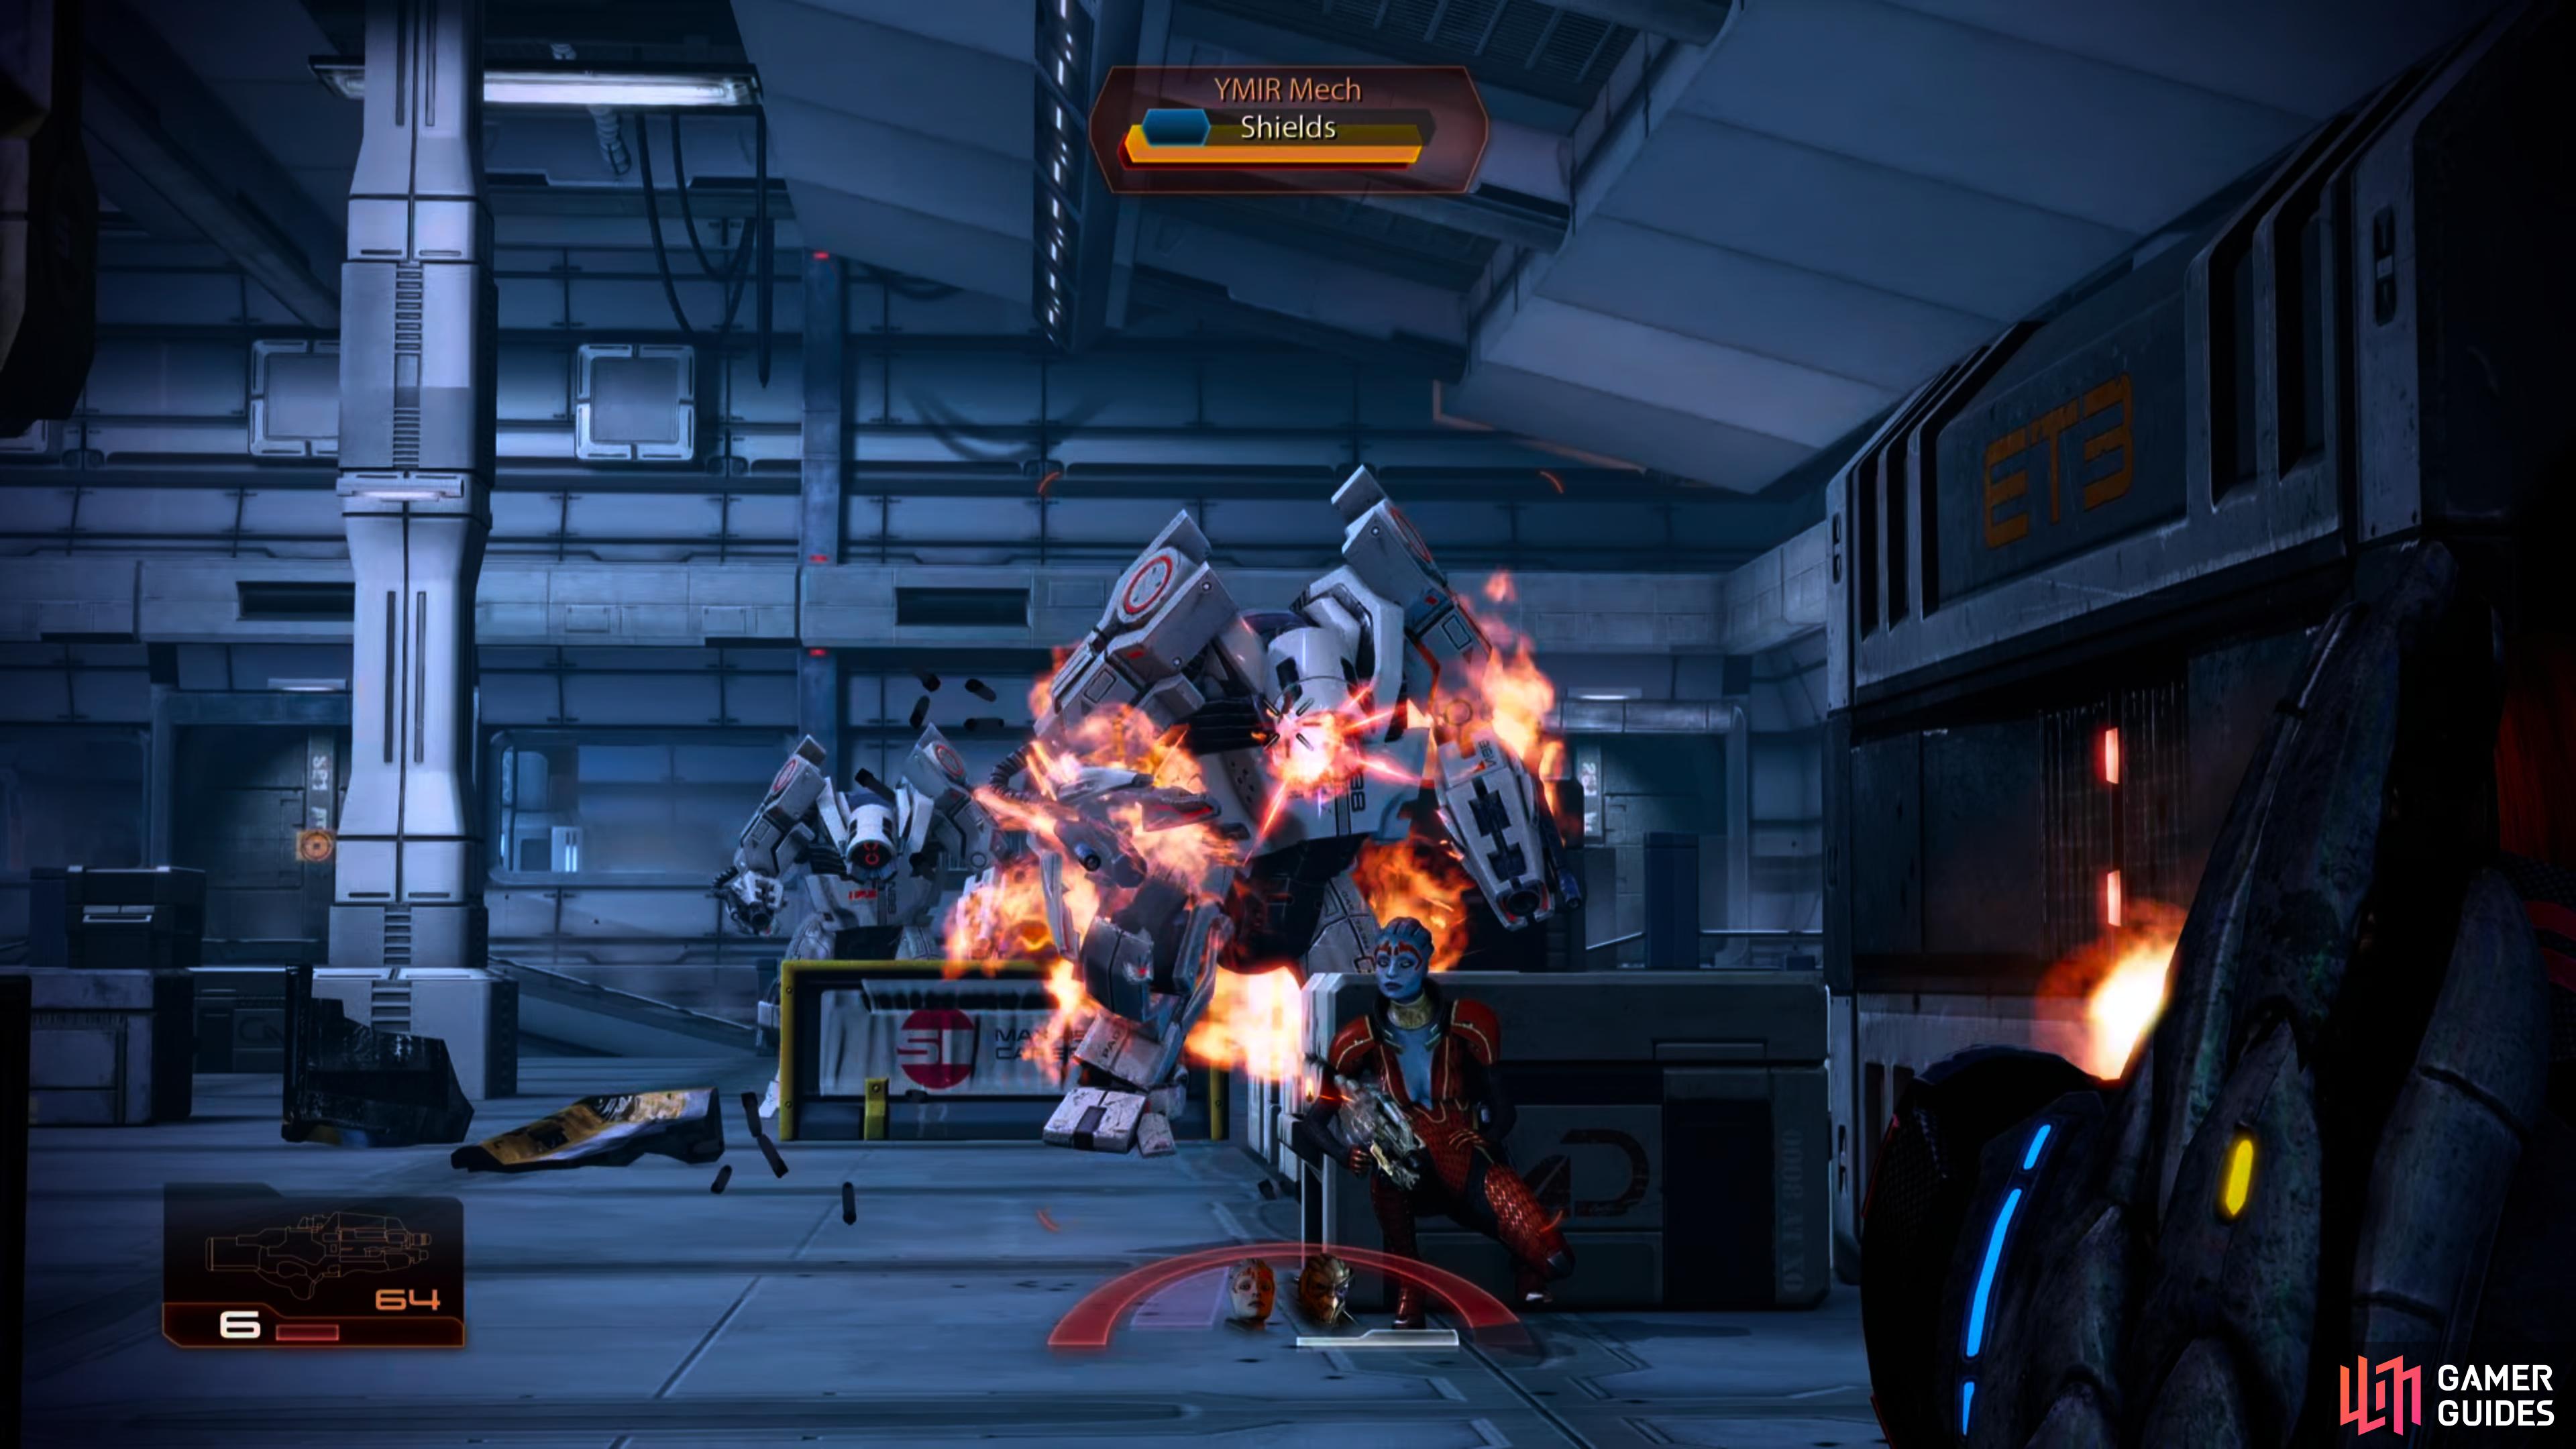 In the cargo room, you'll need to dispatch a pair of YMIR Mechs,